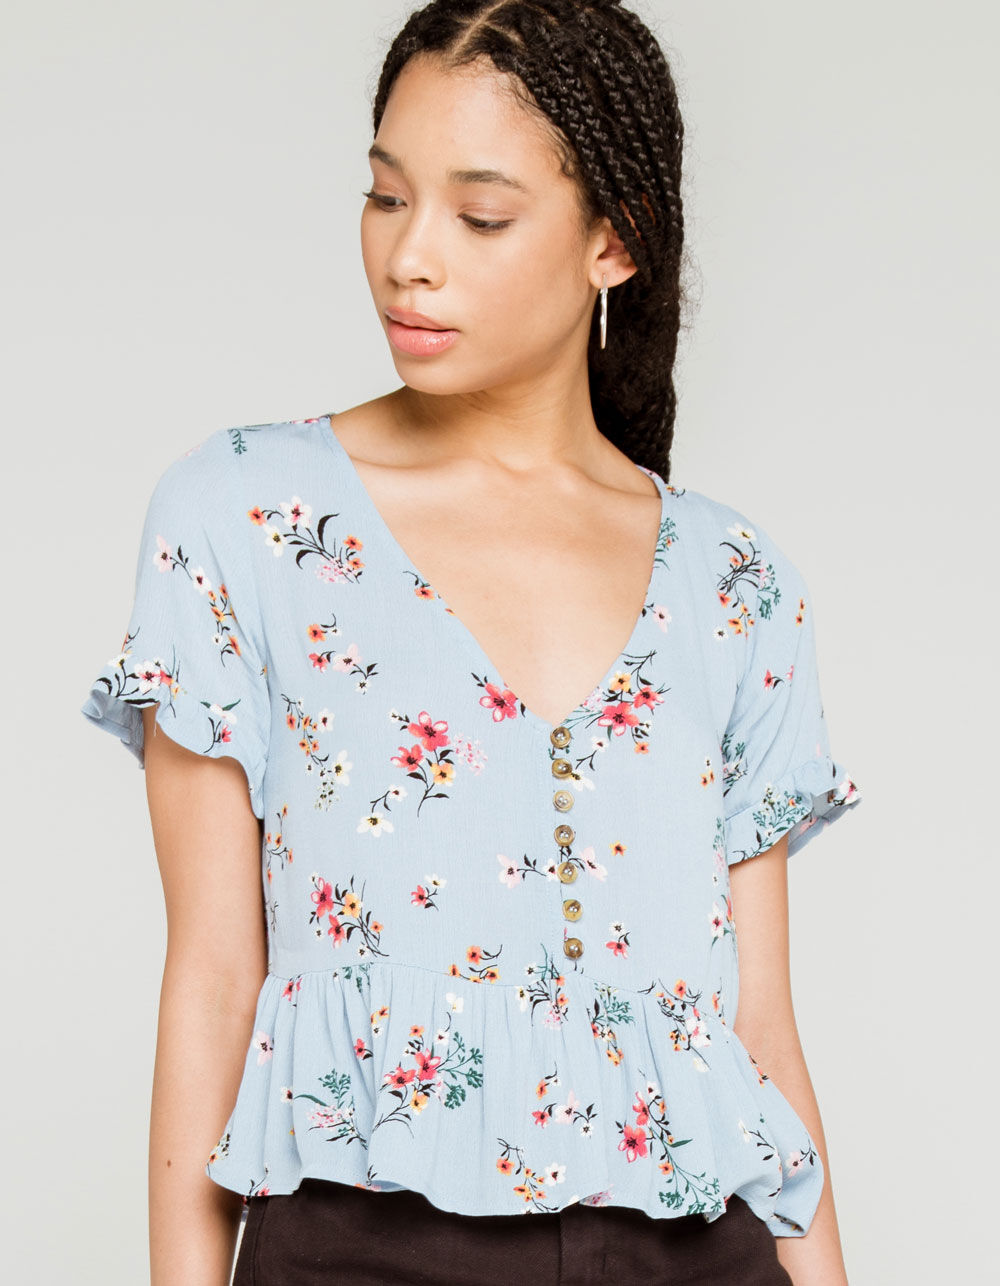 SKY AND SPARROW Floral Button Up Womens Babydoll Top image number 0